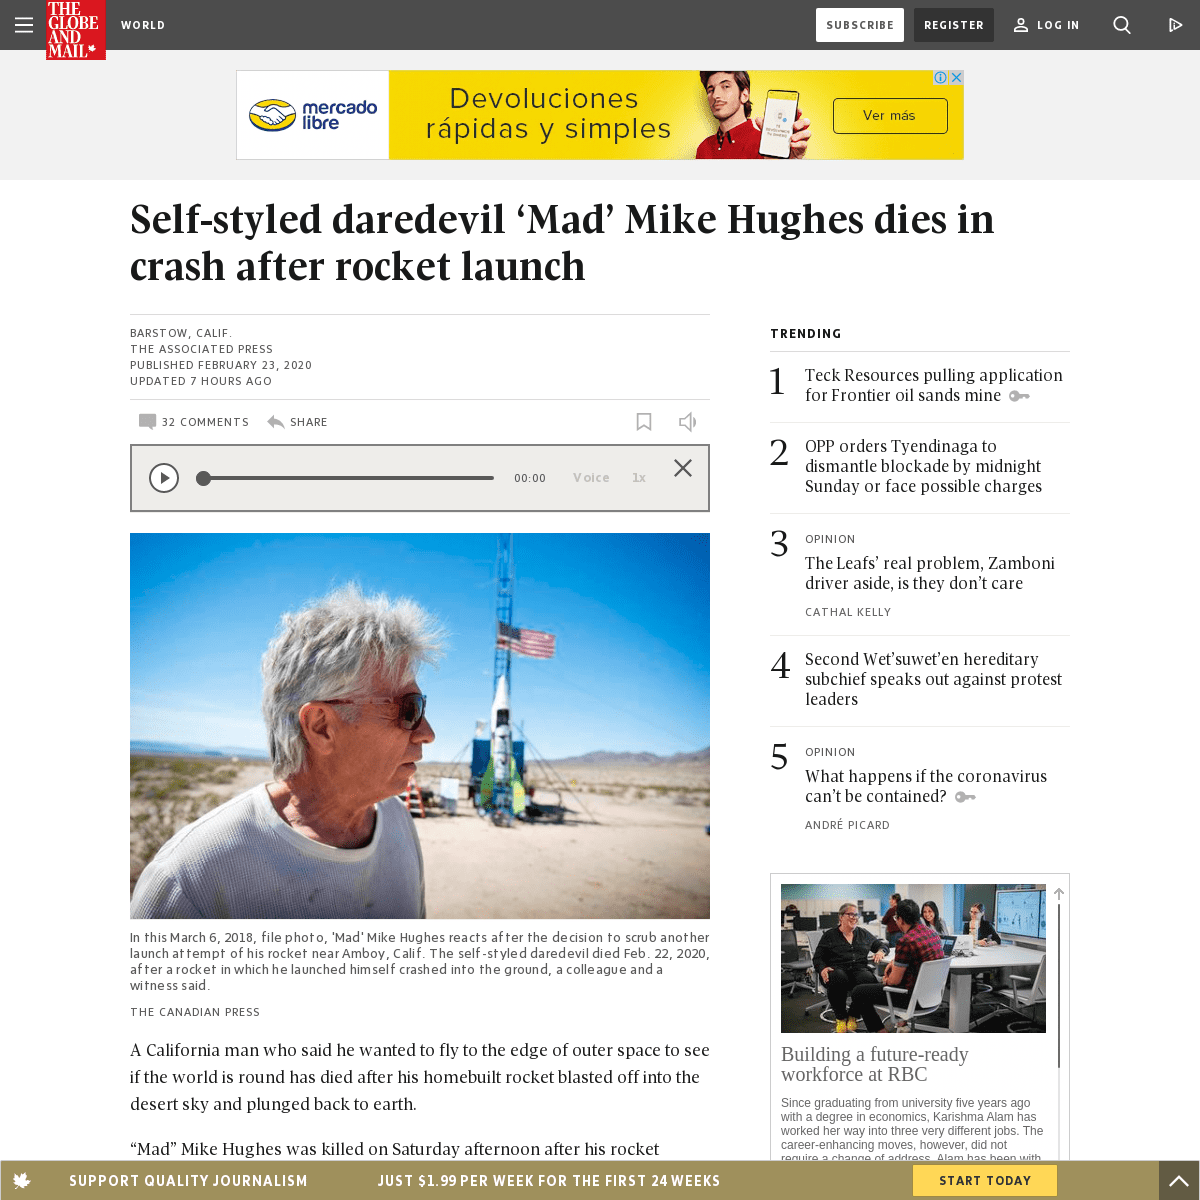 A complete backup of www.theglobeandmail.com/world/article-self-styled-daredevil-mad-mike-hughes-dies-in-crash-after-rocket/